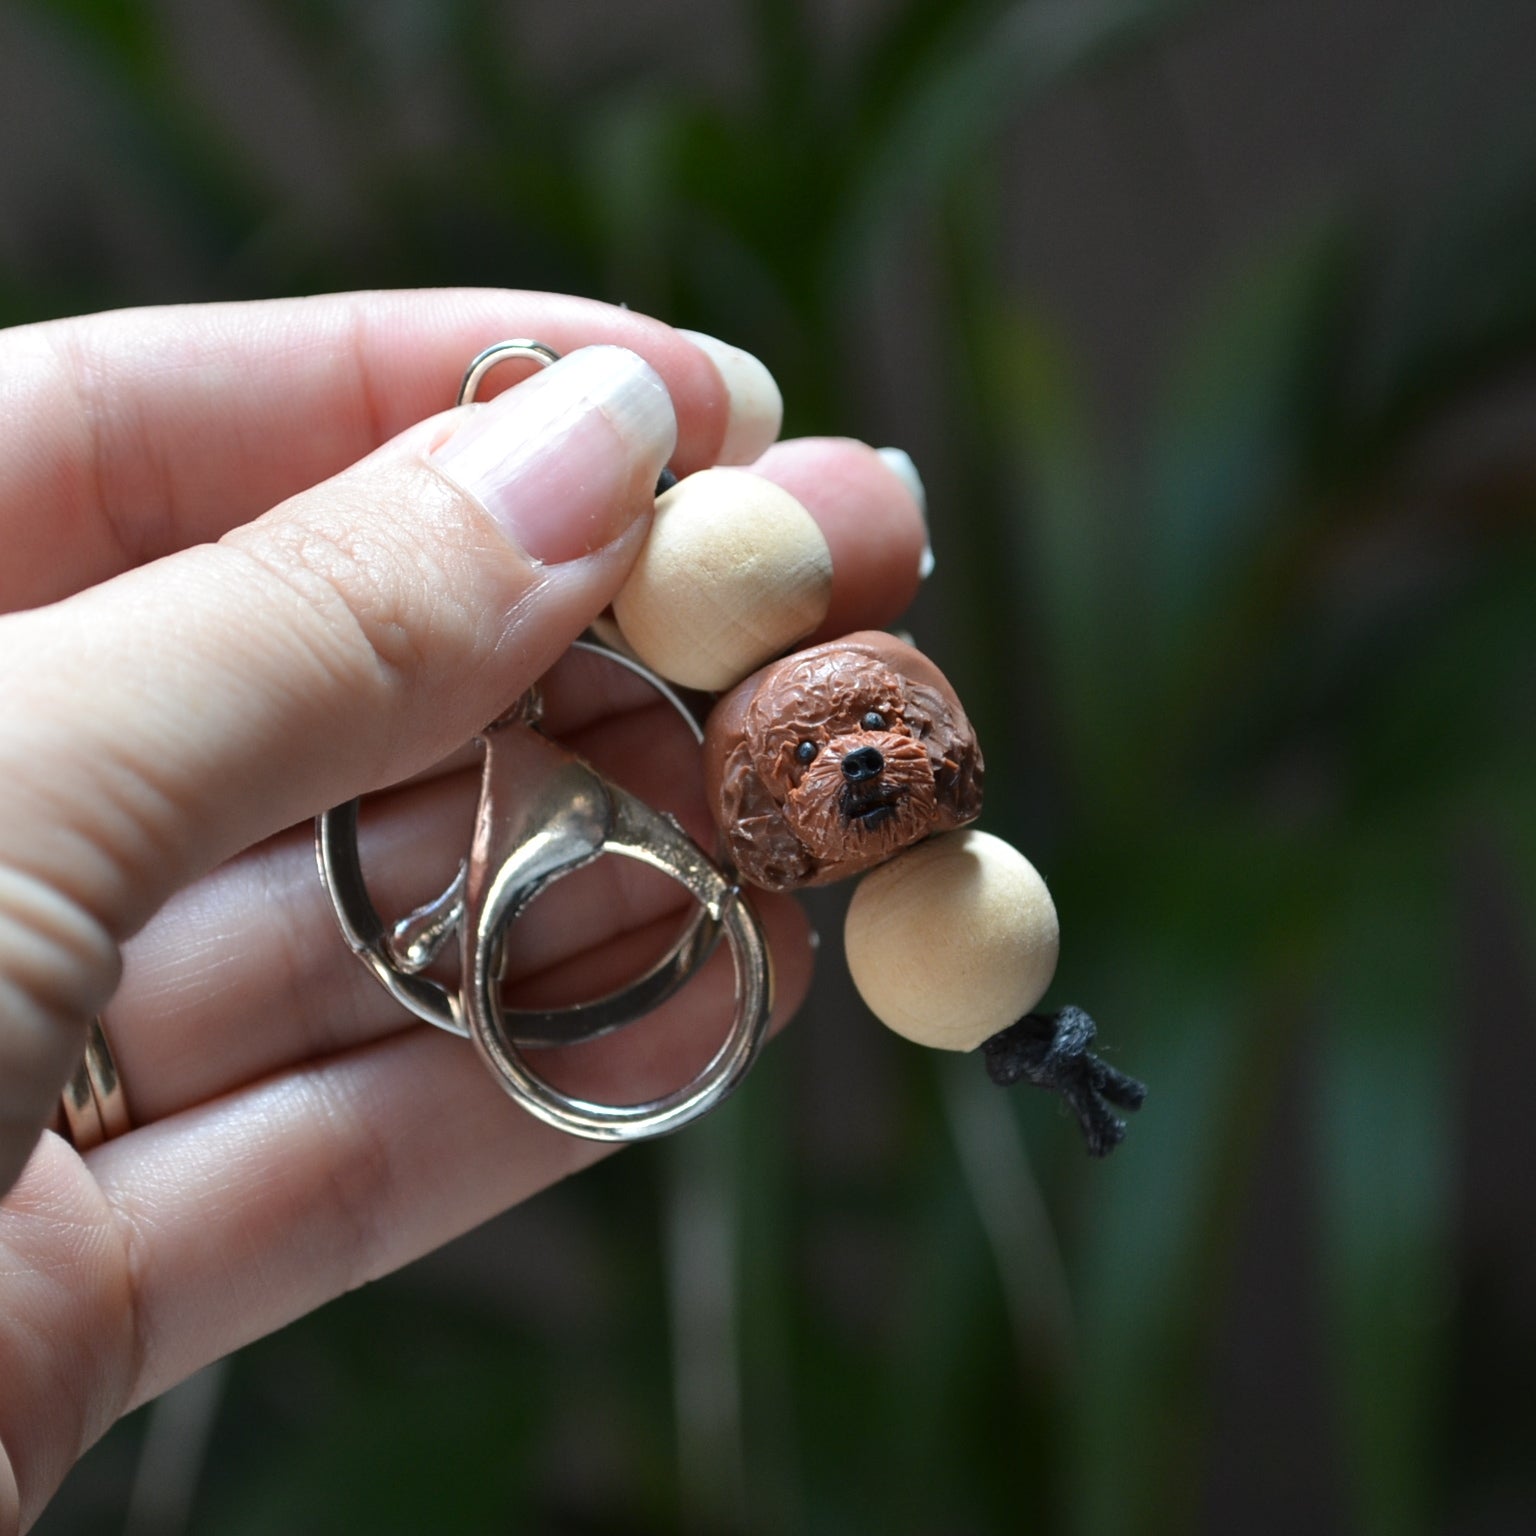 Handmade timber and polymer clay cavoodle dog keychain being held in front of green palm plant background